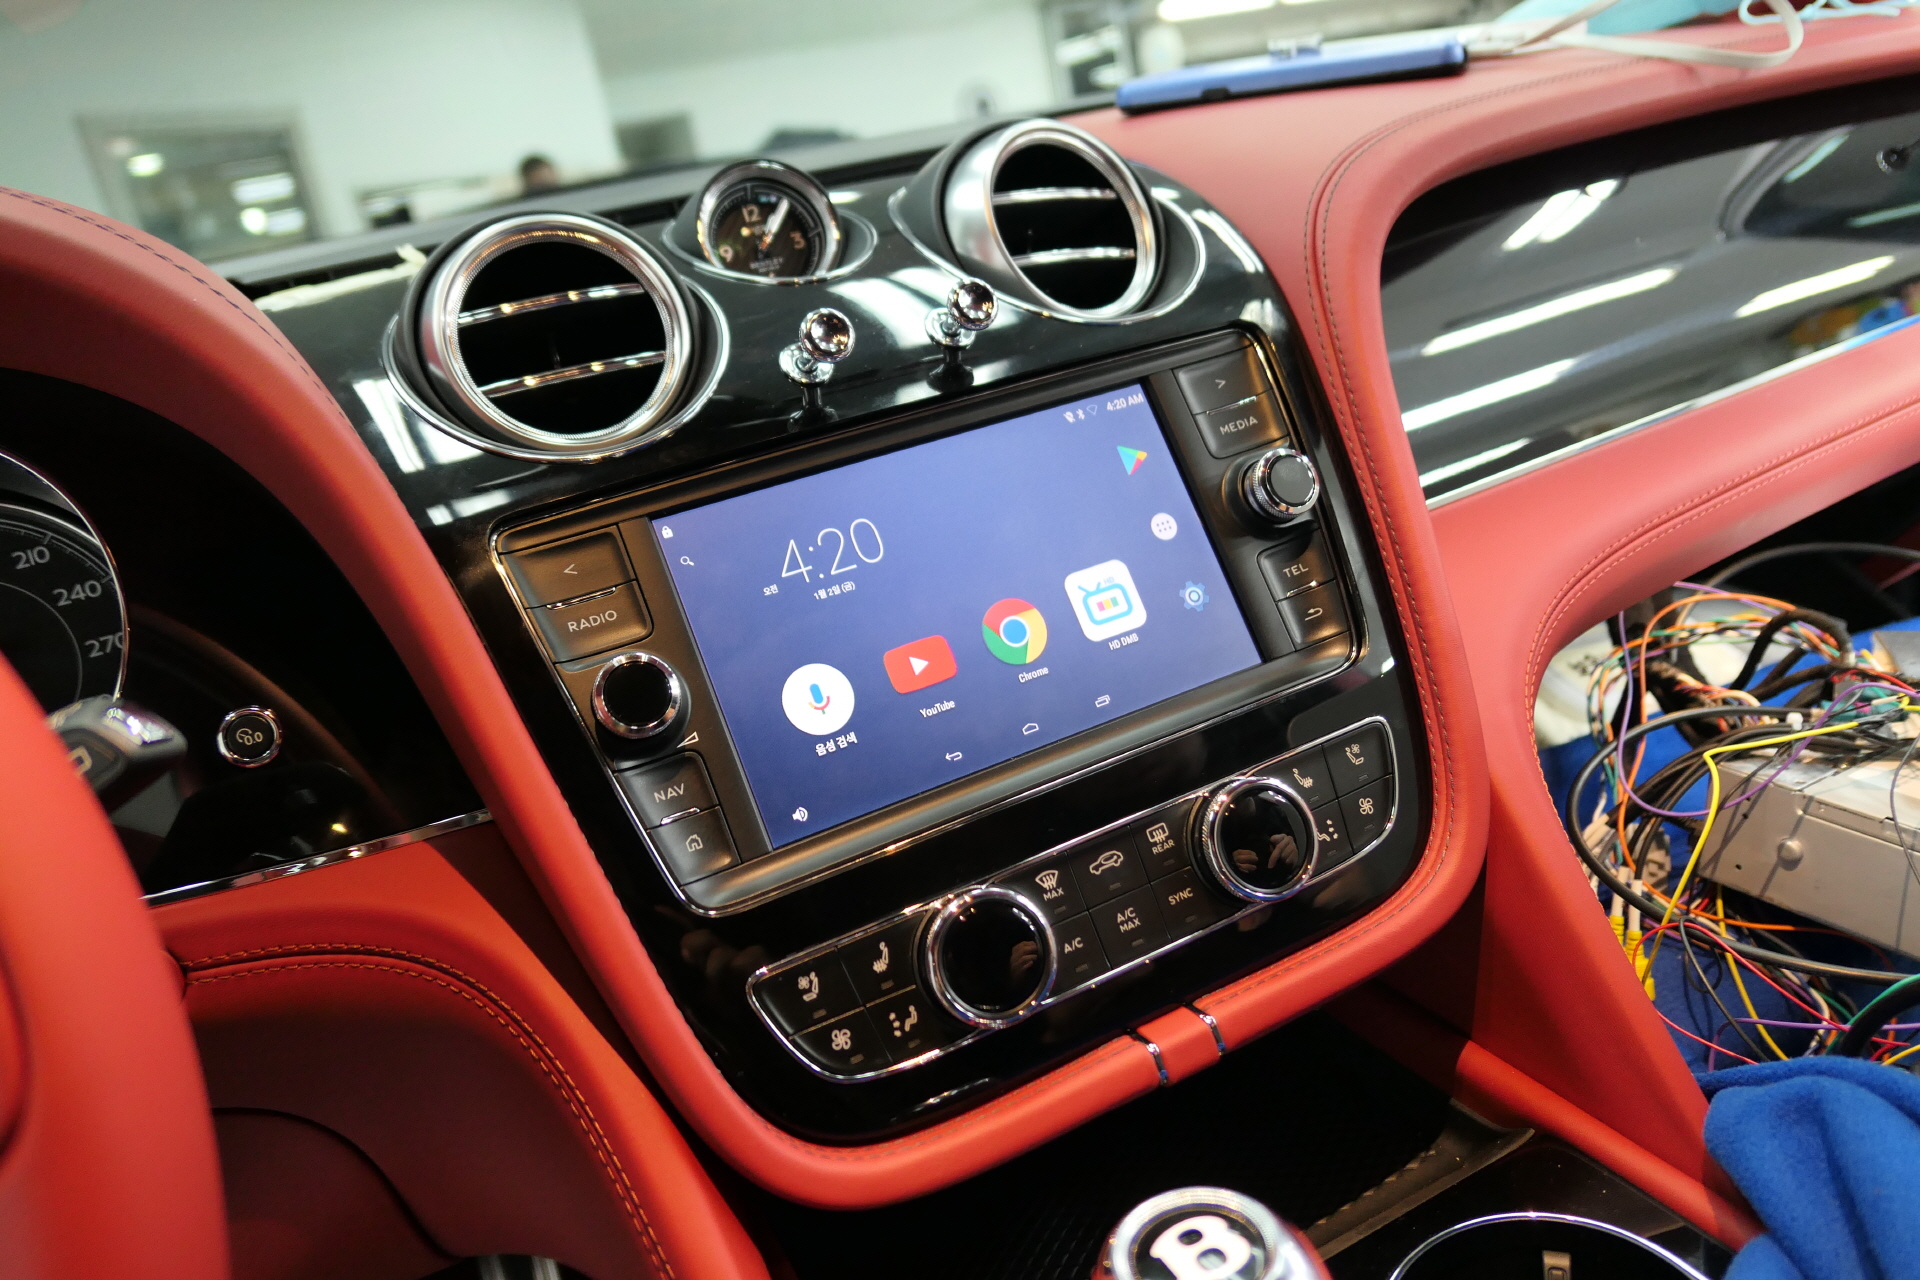 Android Settop for Bentley "M2C-100"